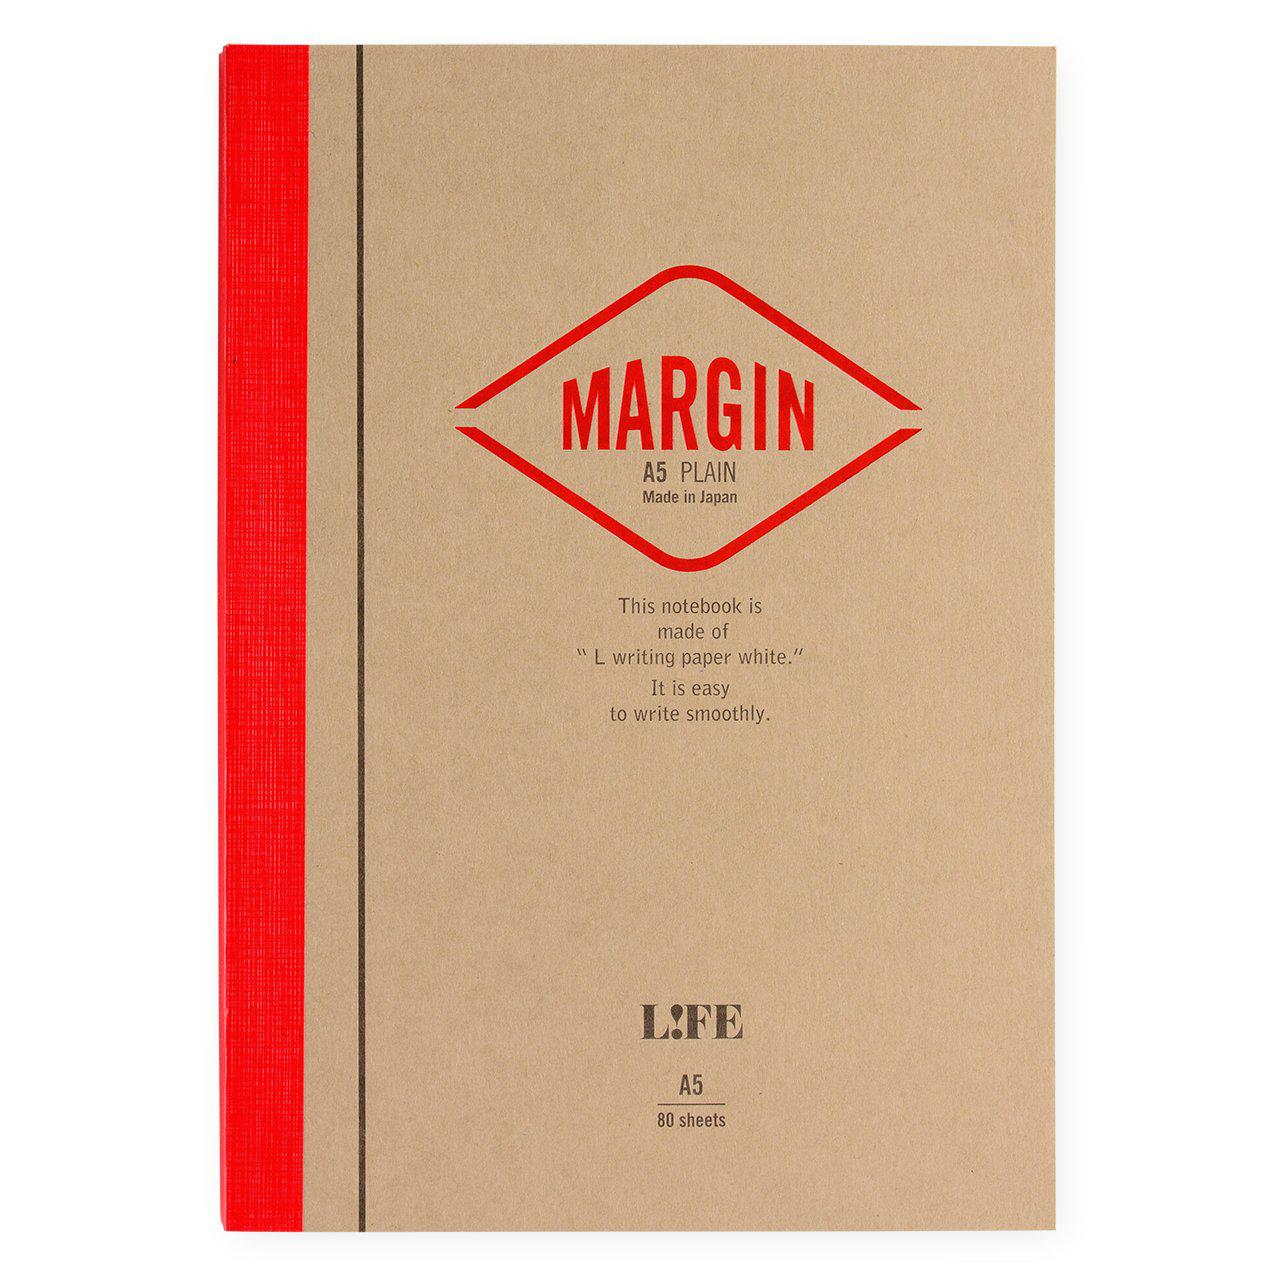 LIFE Stationery Margin A5 or B5 Notebook | Plain, Section or Ruled plain / A5